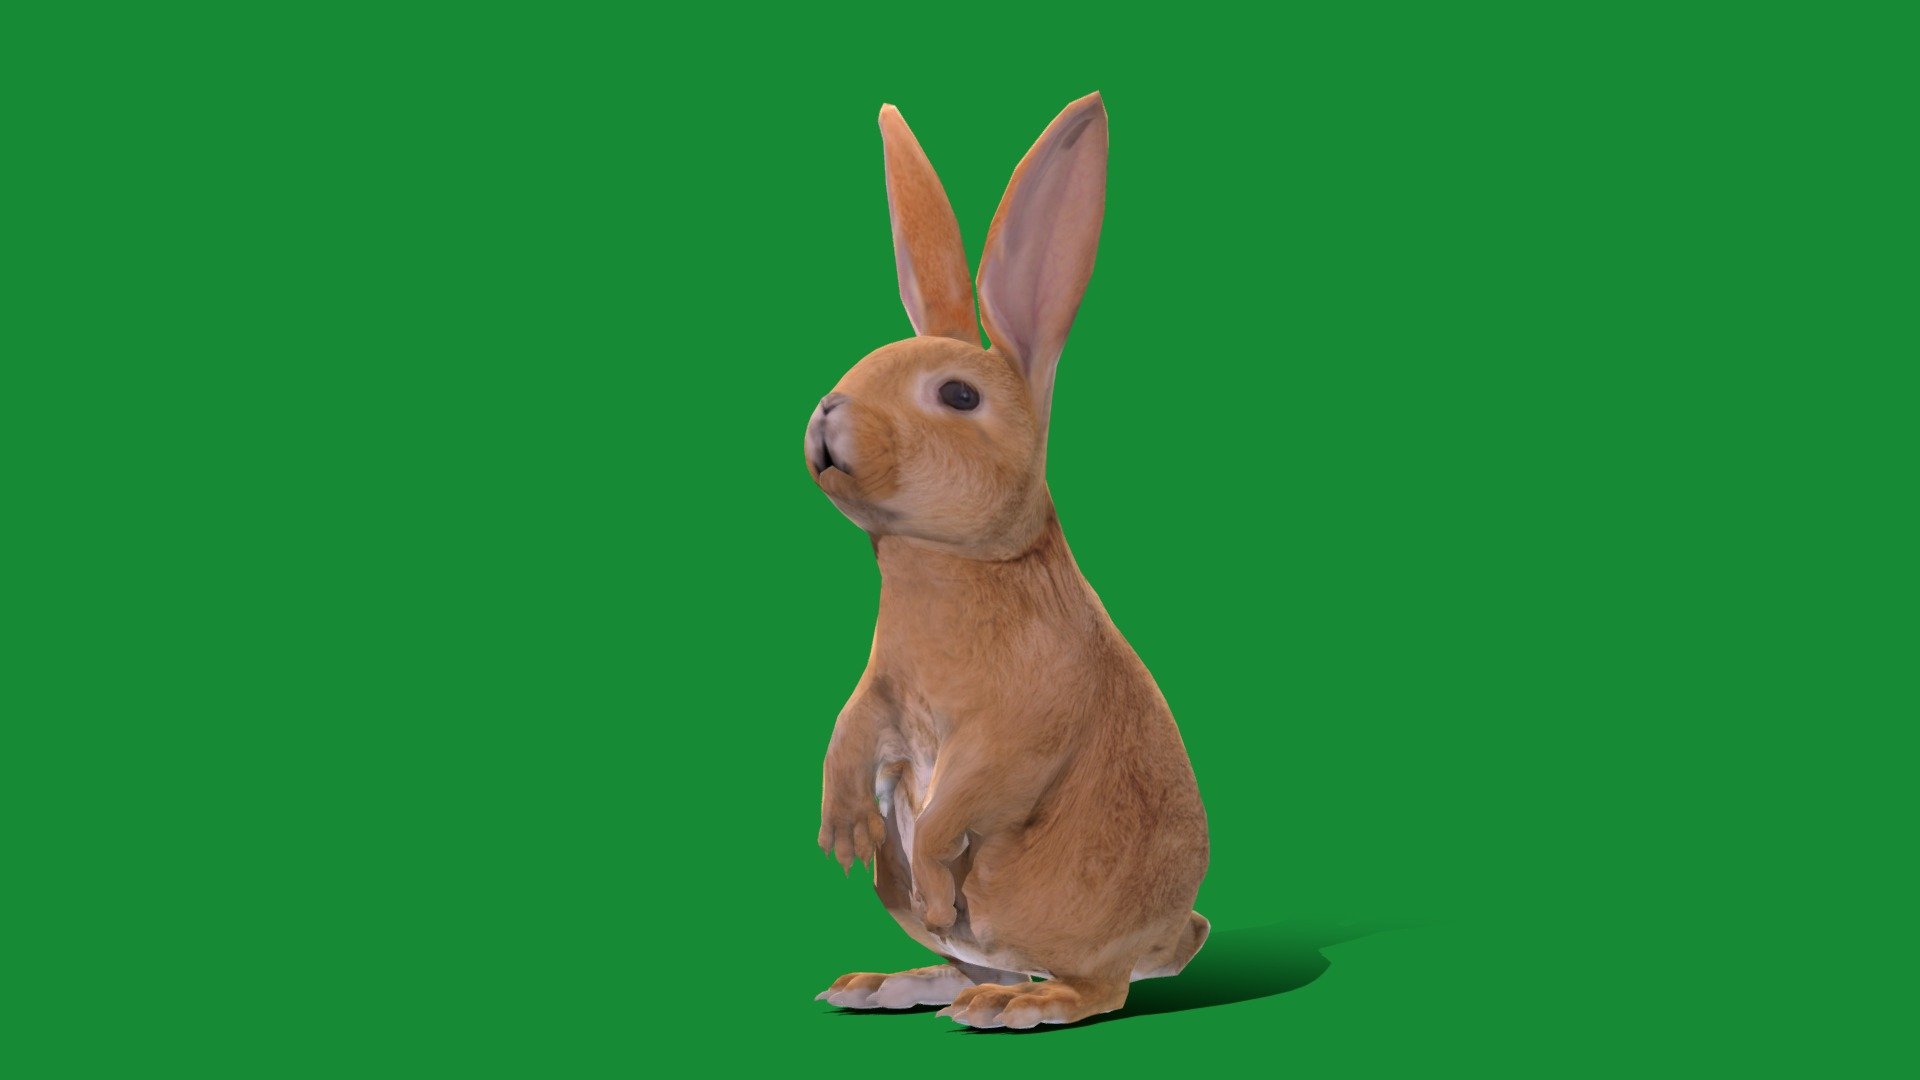 Easter Bunny (Mythical)Rabbit Or Hare ,Easter eggs

Osterus Oryctolagus Cunicululus Animal Mammal(folkloric figure)Pet,Cute

1 Draw Calls

LowPoly

Game Ready (Assets)

Subdivision Surface Ready

Single - Animations 

4K PBR Textures 1 Material

Unreal/Unity FBX 

Blend File 3.6.5 LTS / 4 Plus

USDZ File (AR Ready). Real Scale Dimension (Xcode ,Reality Composer, Keynote Ready)

Textures Files

GLB File (Unreal 5.1 Plus Native Support,Gadot)

Gltf File ( Spark AR, Lens Studio(SnapChat) , Effector(Tiktok) , Spline, Play Canvas,Omiverse ) Compatible

Triangles -6692

Faces -3384

Edges -6741

Vertices -3362

Diffuse, Metallic, Roughness , Normal Map ,Specular Map,AO


The Easter Bunny is a mythical mammal that delivers decorated eggs to children on Easter Sunday.The Easter Bunny is a folkloric figure that's also known as the Easter Rabbit or Easter Hare. The Easter Bunny is a symbol of Easter, a Christian holiday that celebrates the resurrection of Christ 3d model